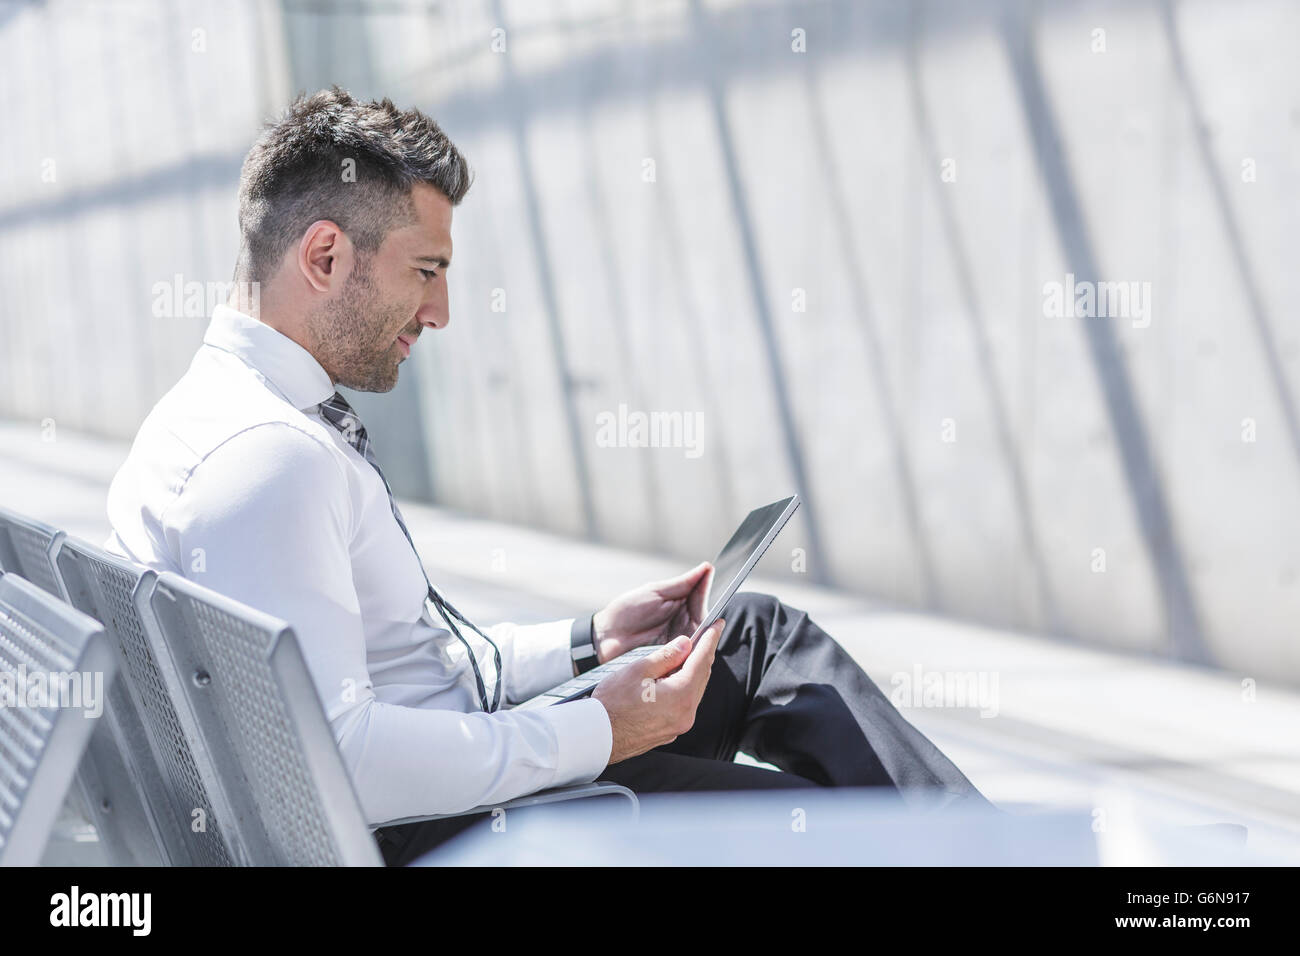 Businessman using digital tablet at waiting area Stock Photo